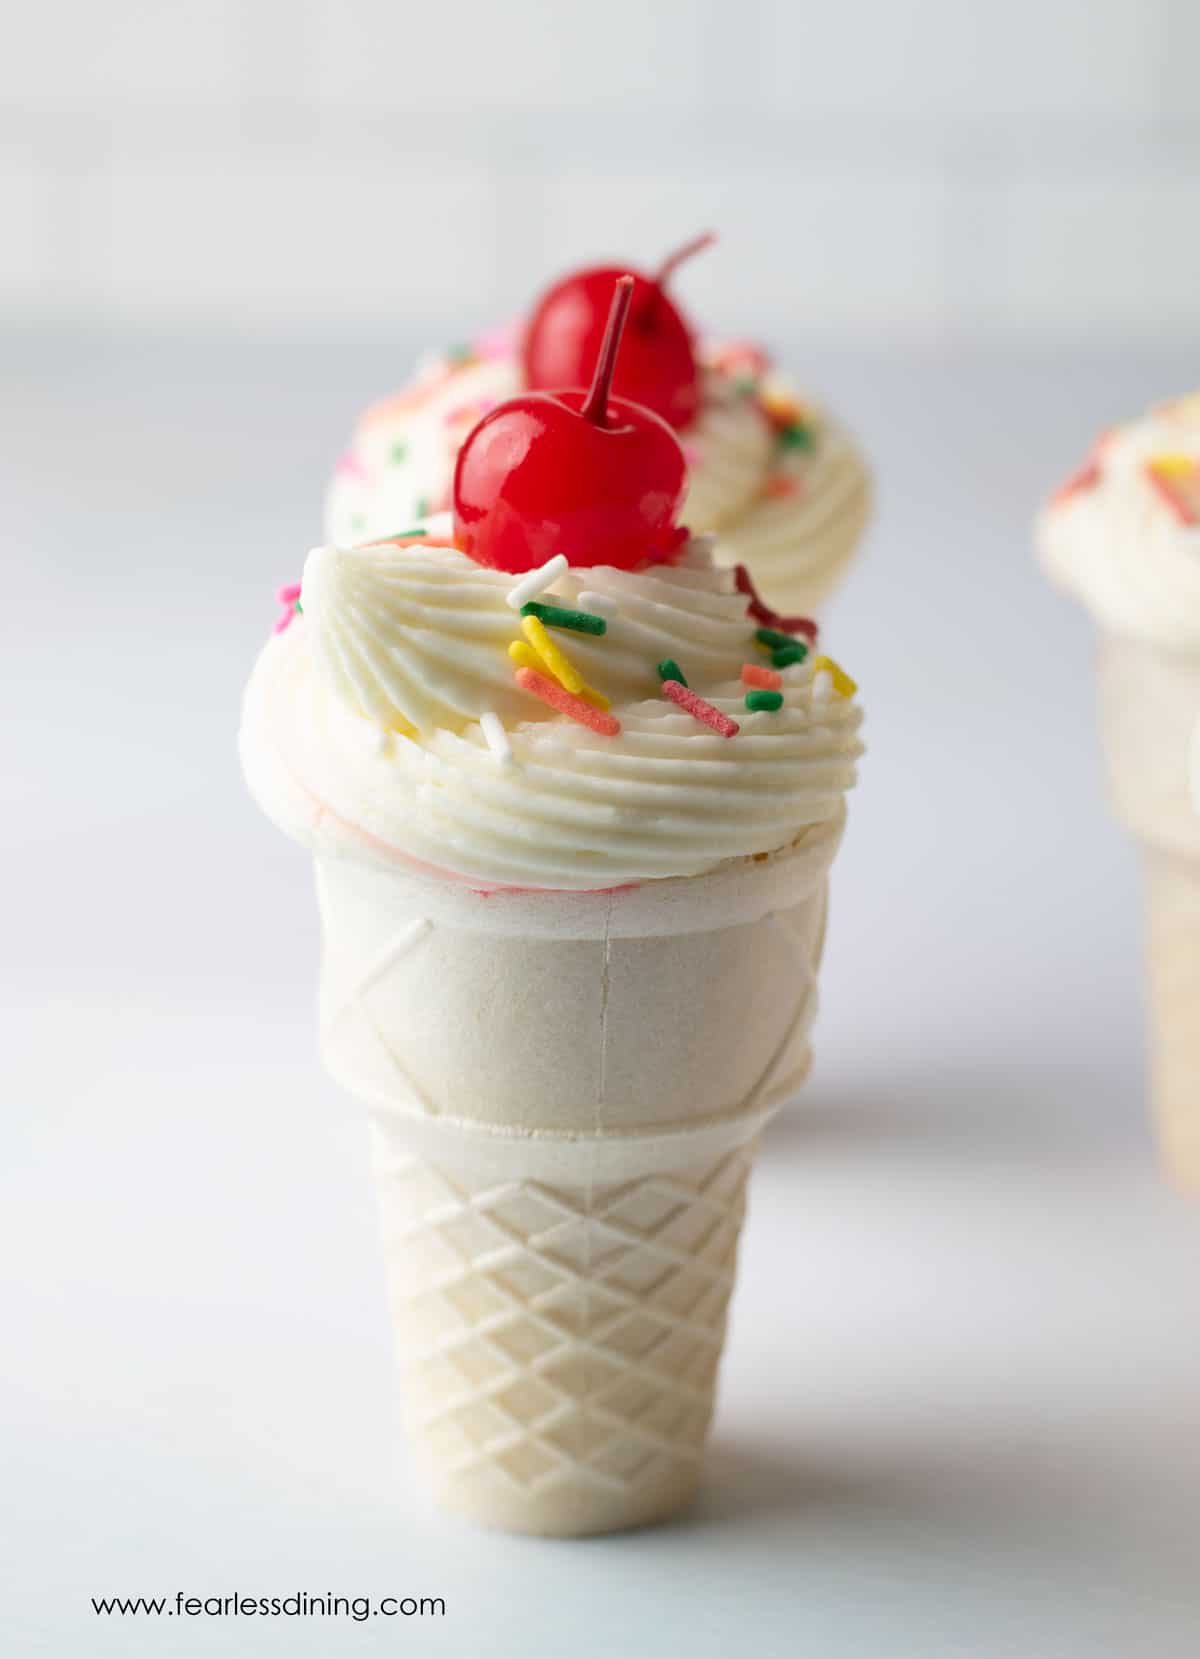 cupcakes baked in ice cream cones